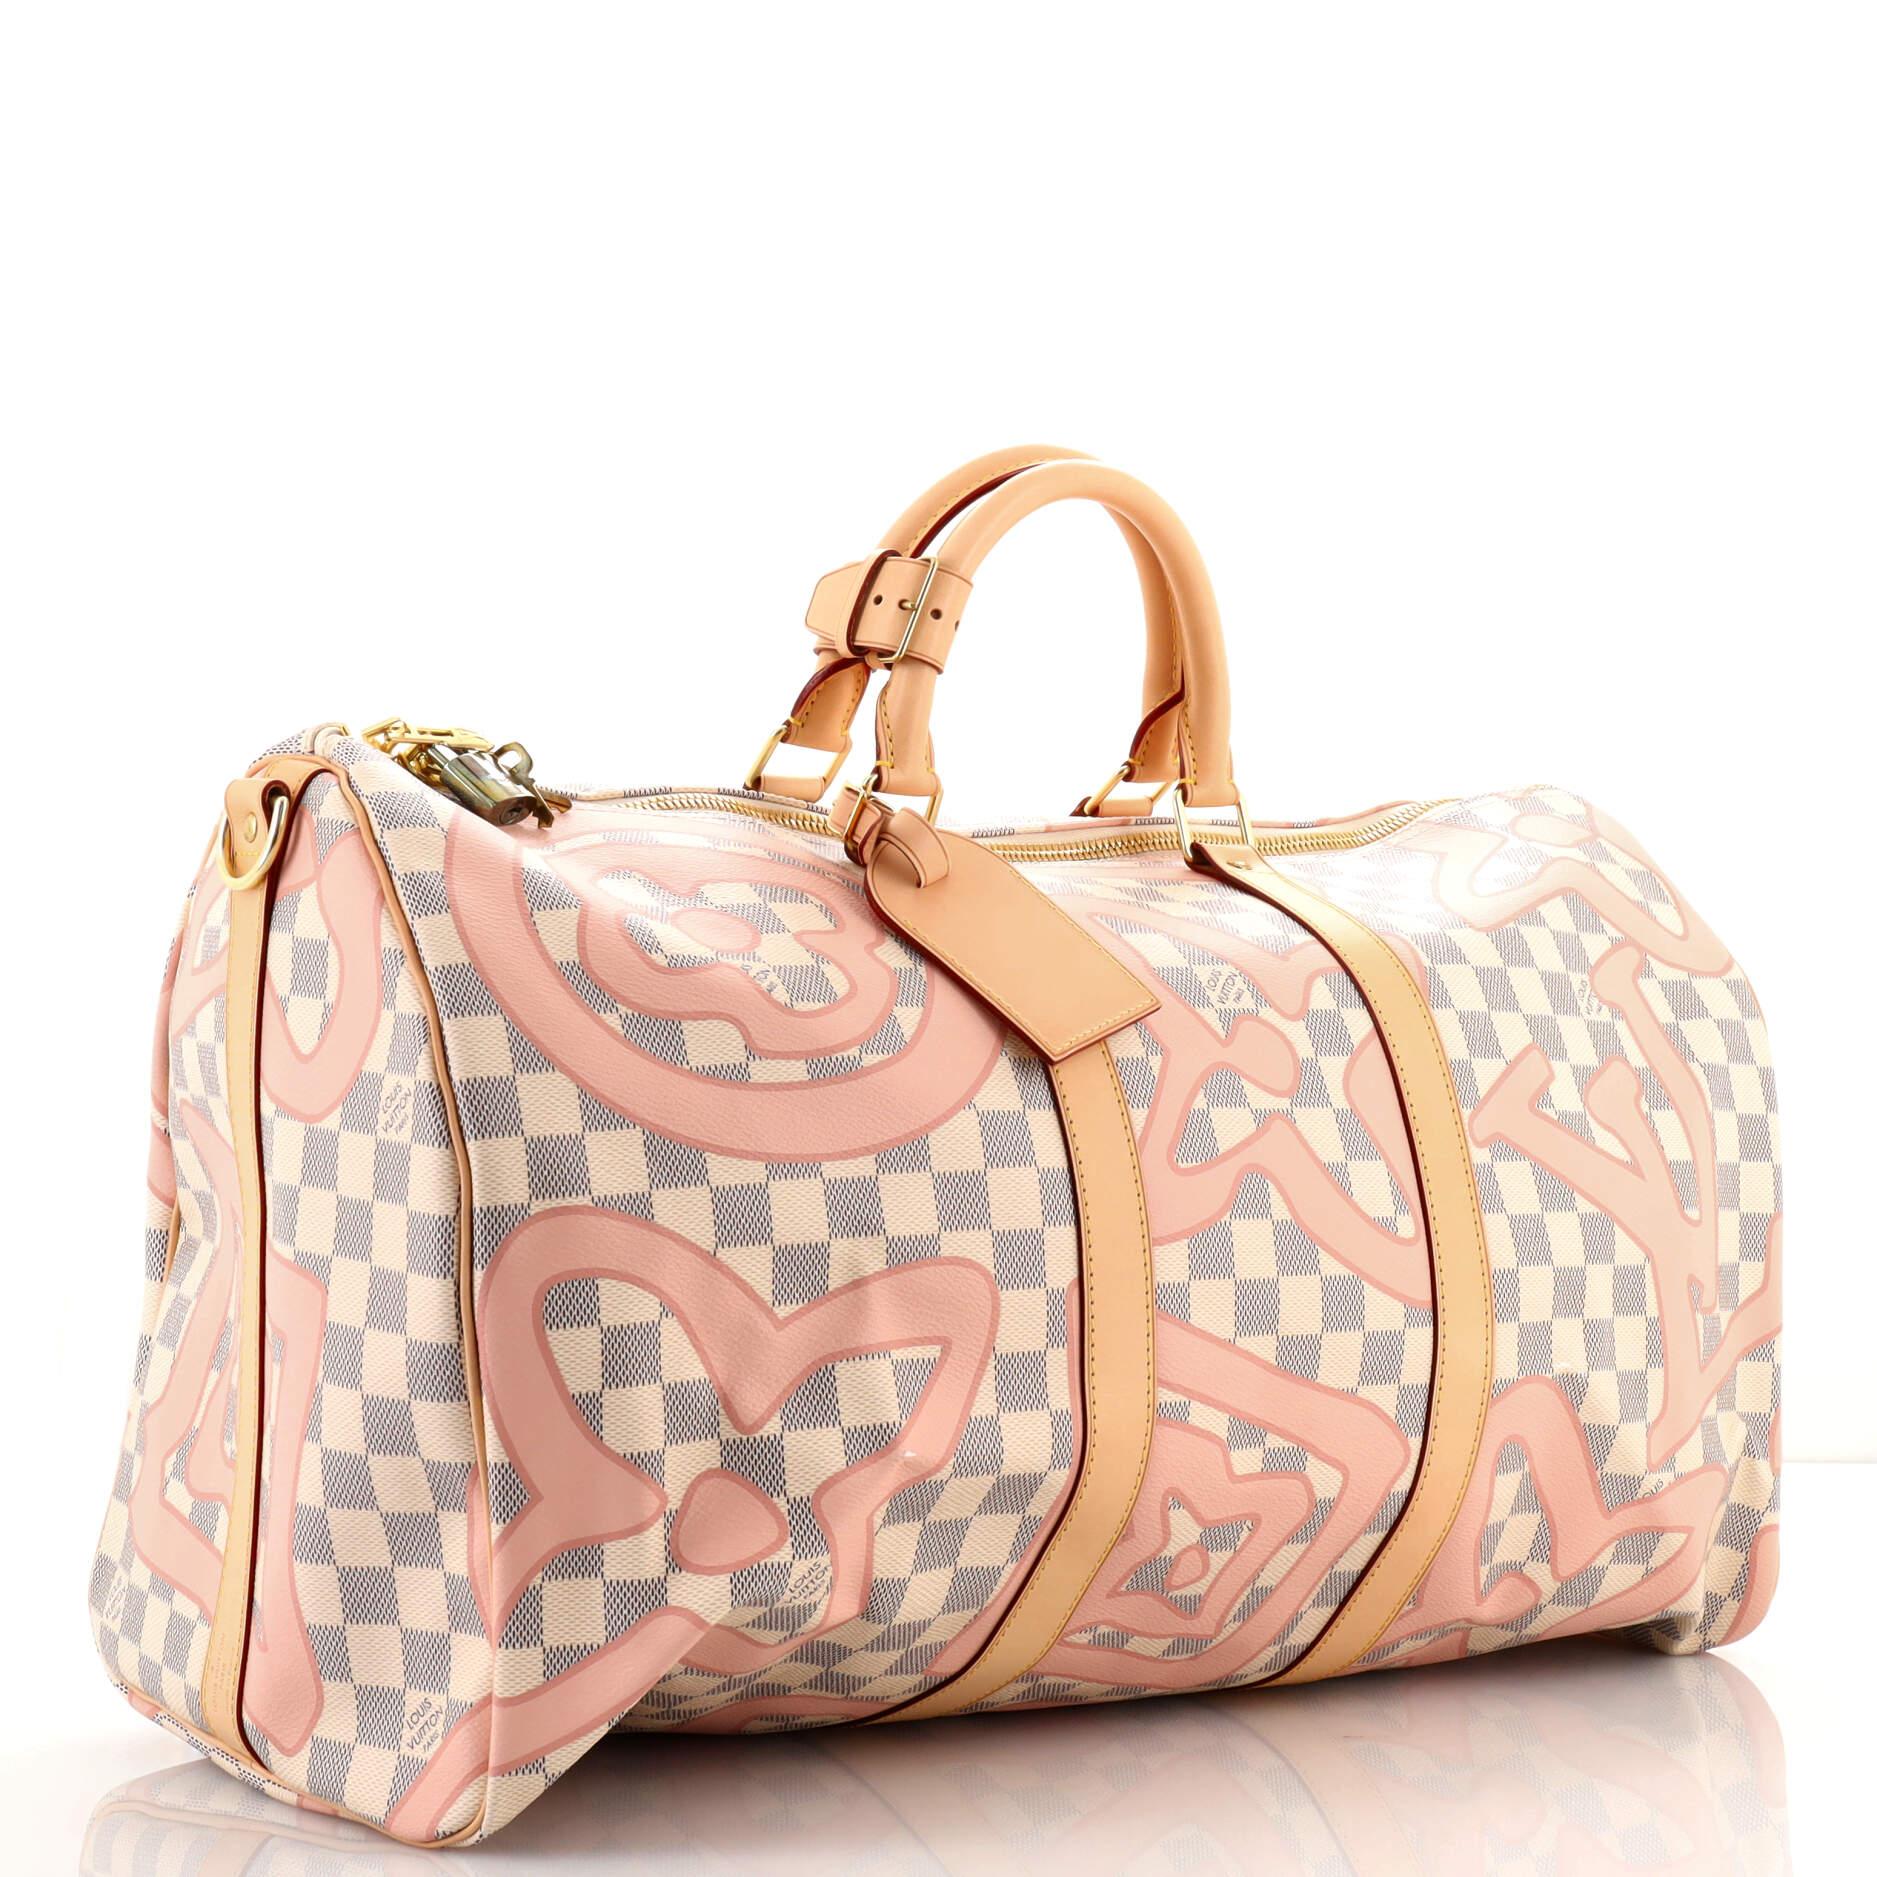 Beige Louis Vuitton Keepall Bandouliere Bag Limited Edition Damier Tahitienne 50